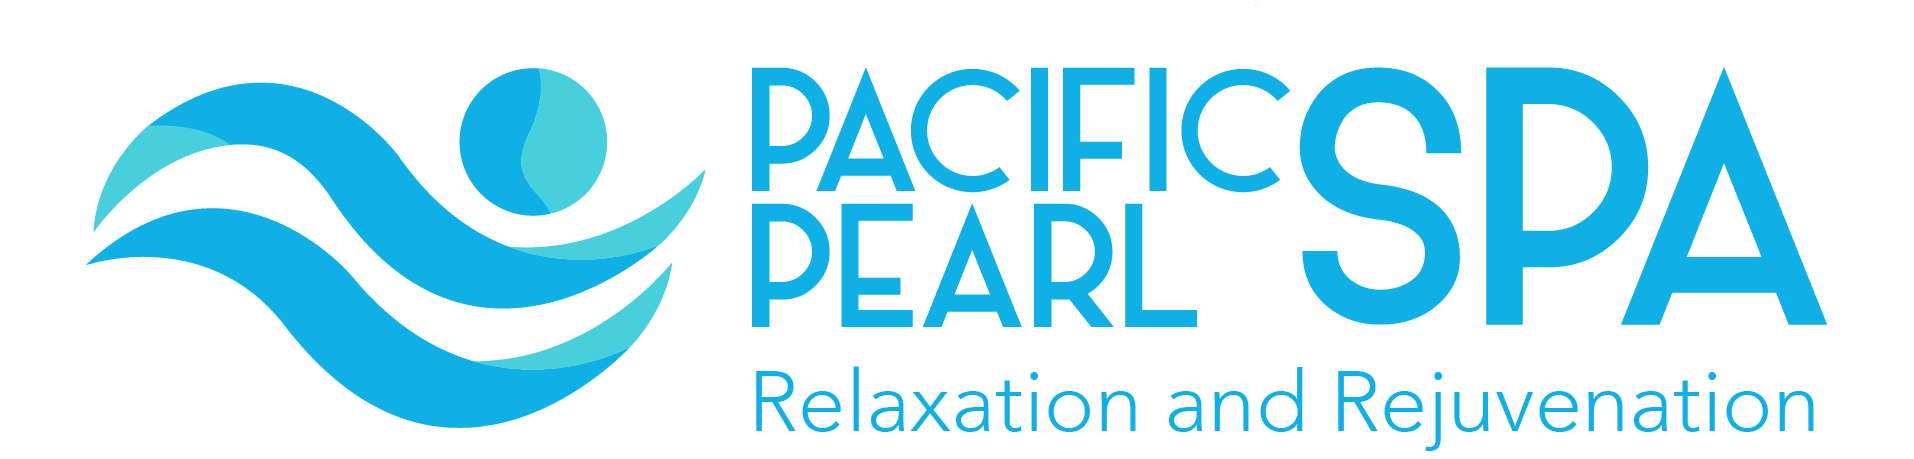 Pacific Pearl Spa - Relaxation and Rejuvenation